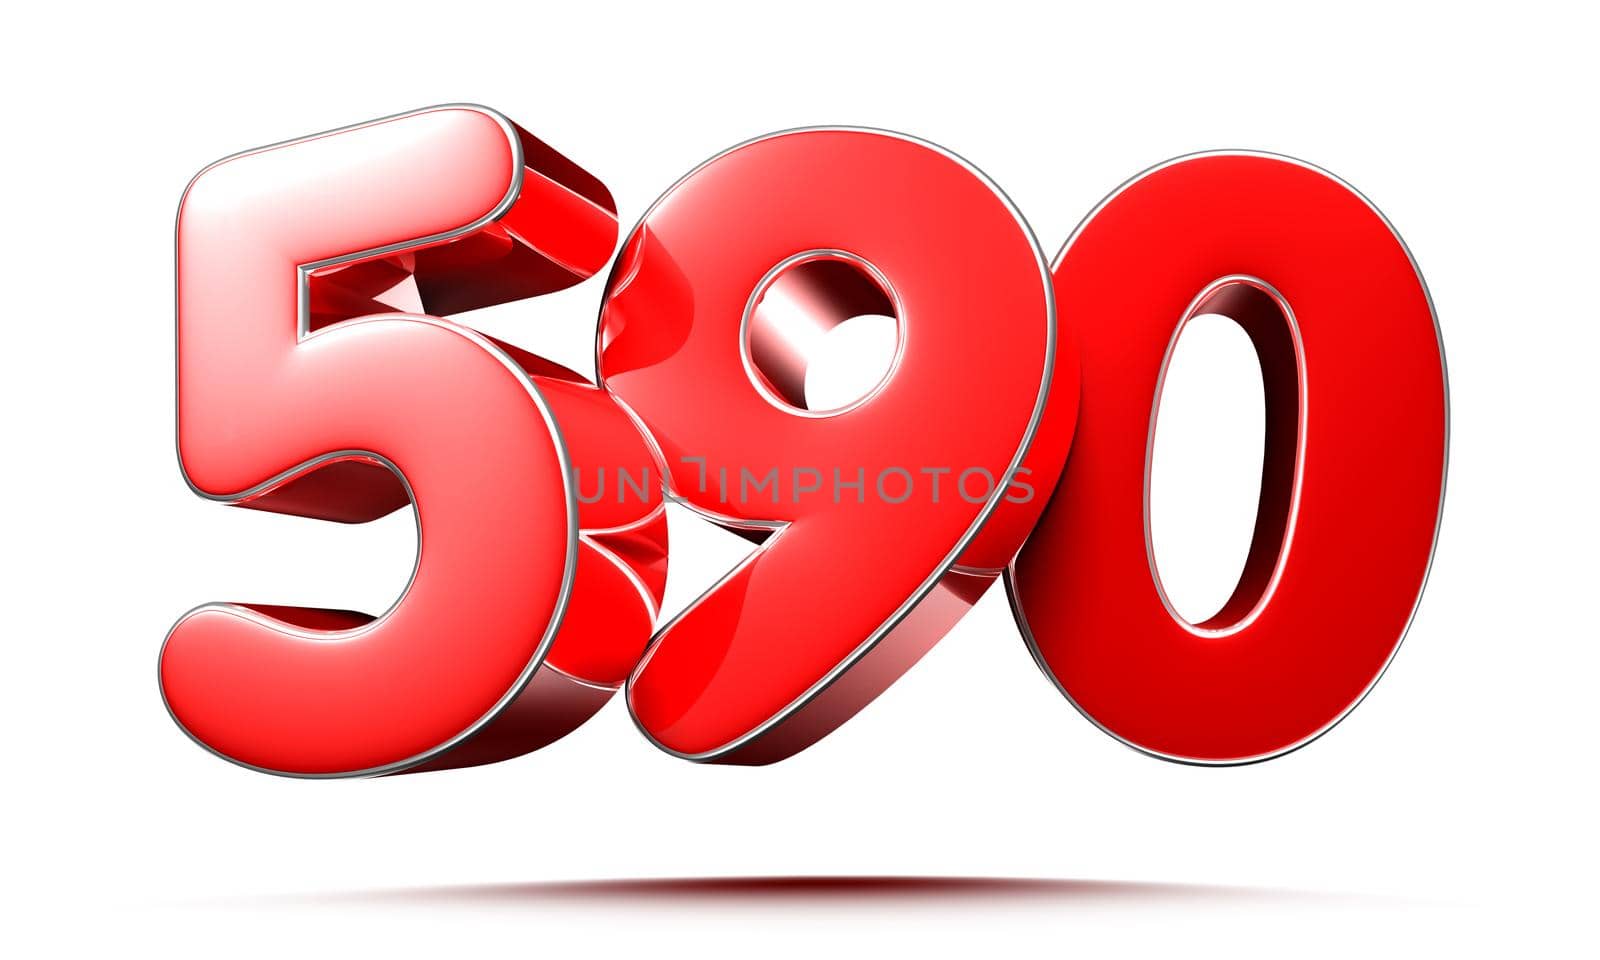 Rounded red numbers 590 on white background 3D illustration with clipping path by thitimontoyai